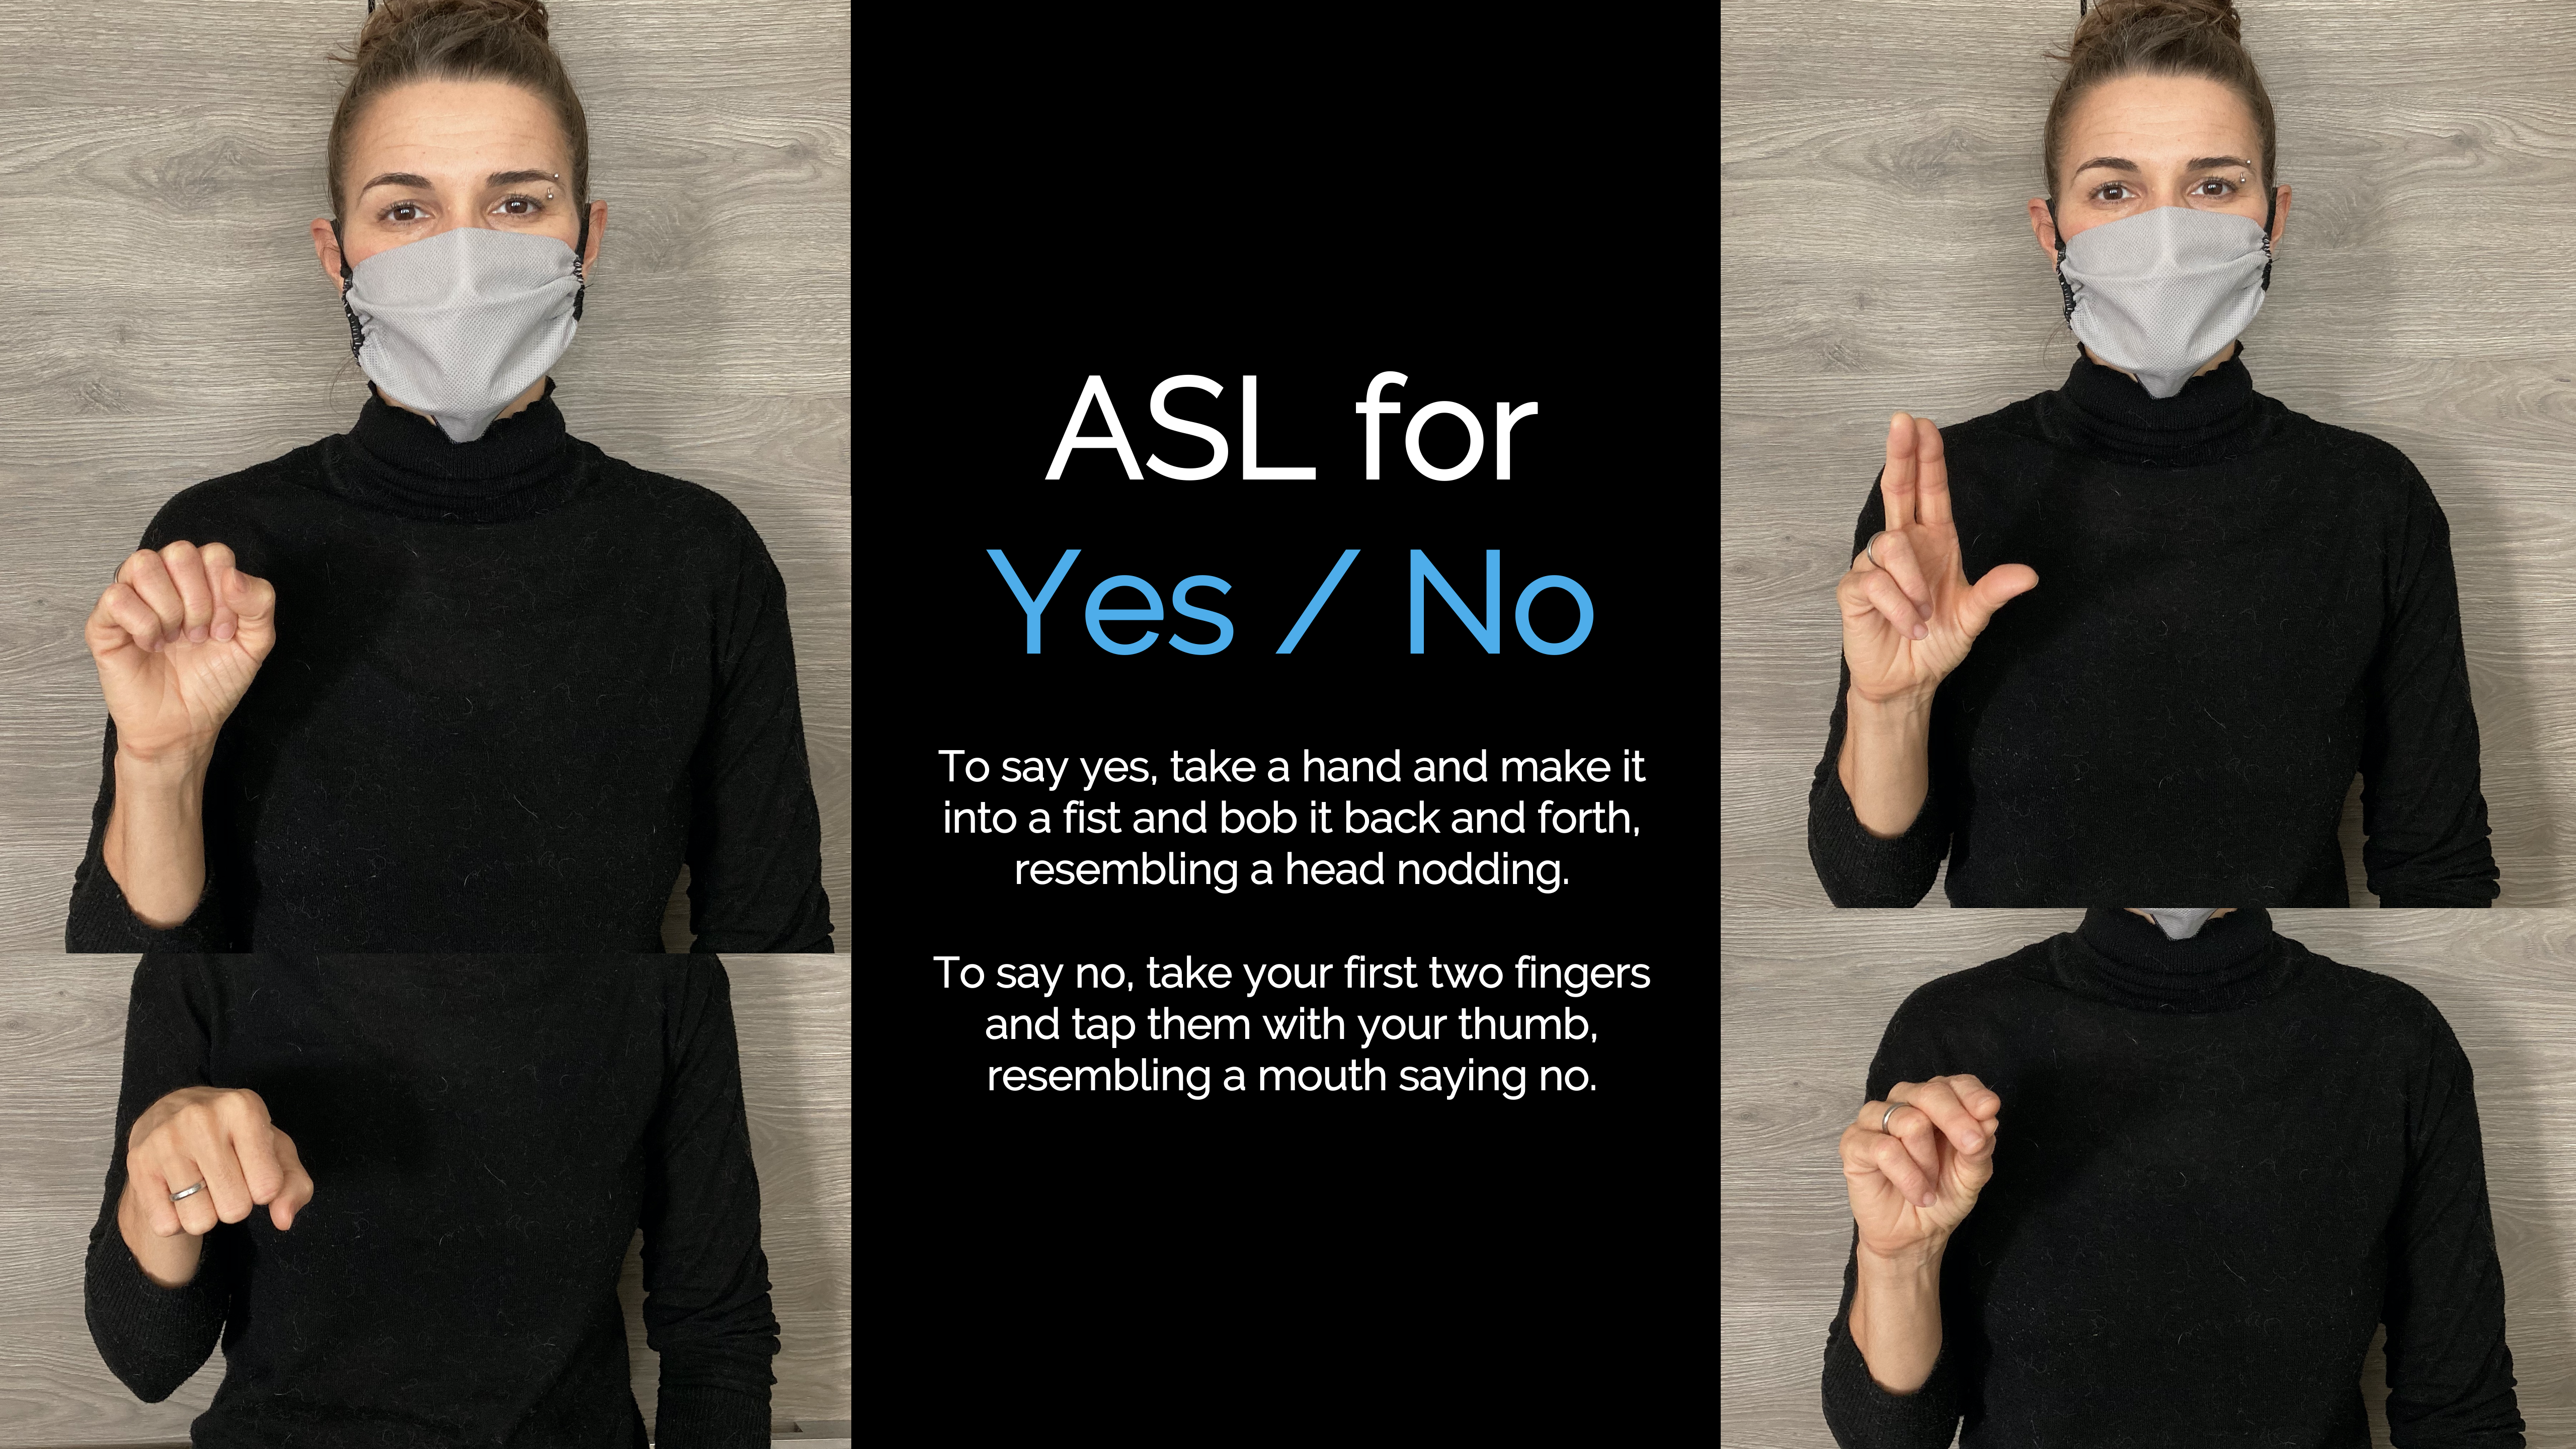 Woman does ASL for Yes/ No 